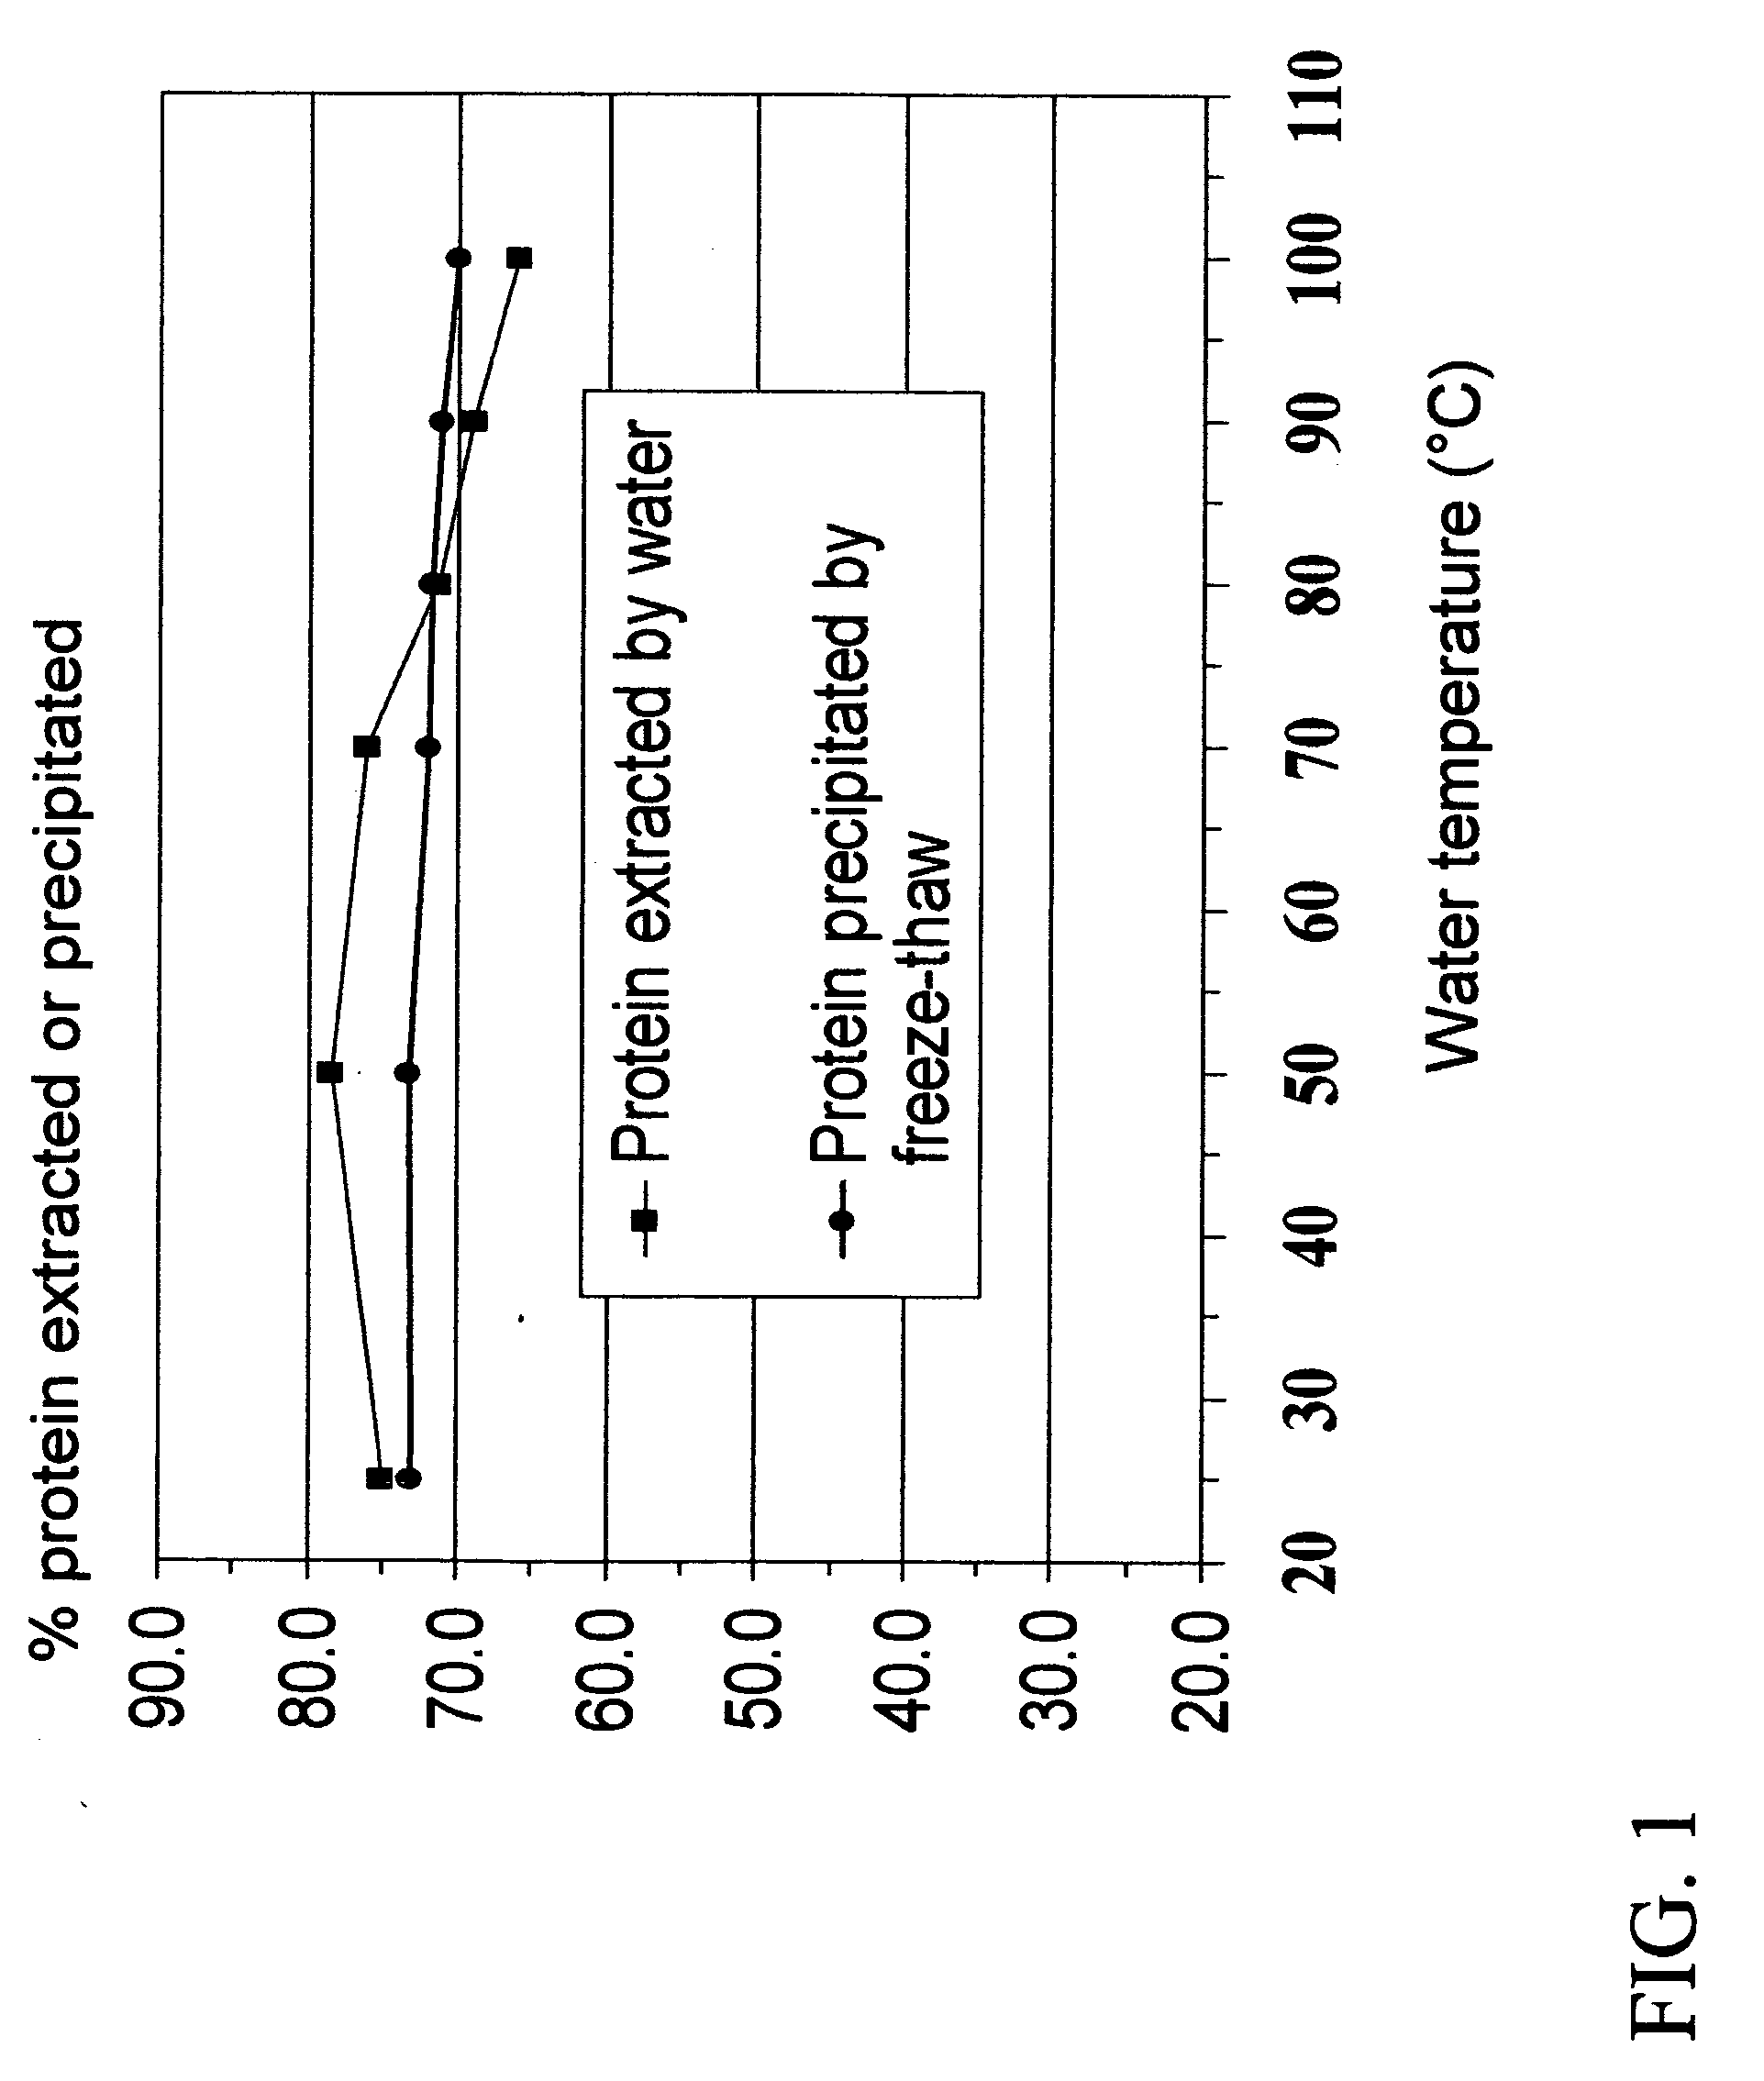 Methods of extracting, concentrating and fractionating proteins and other chemical components